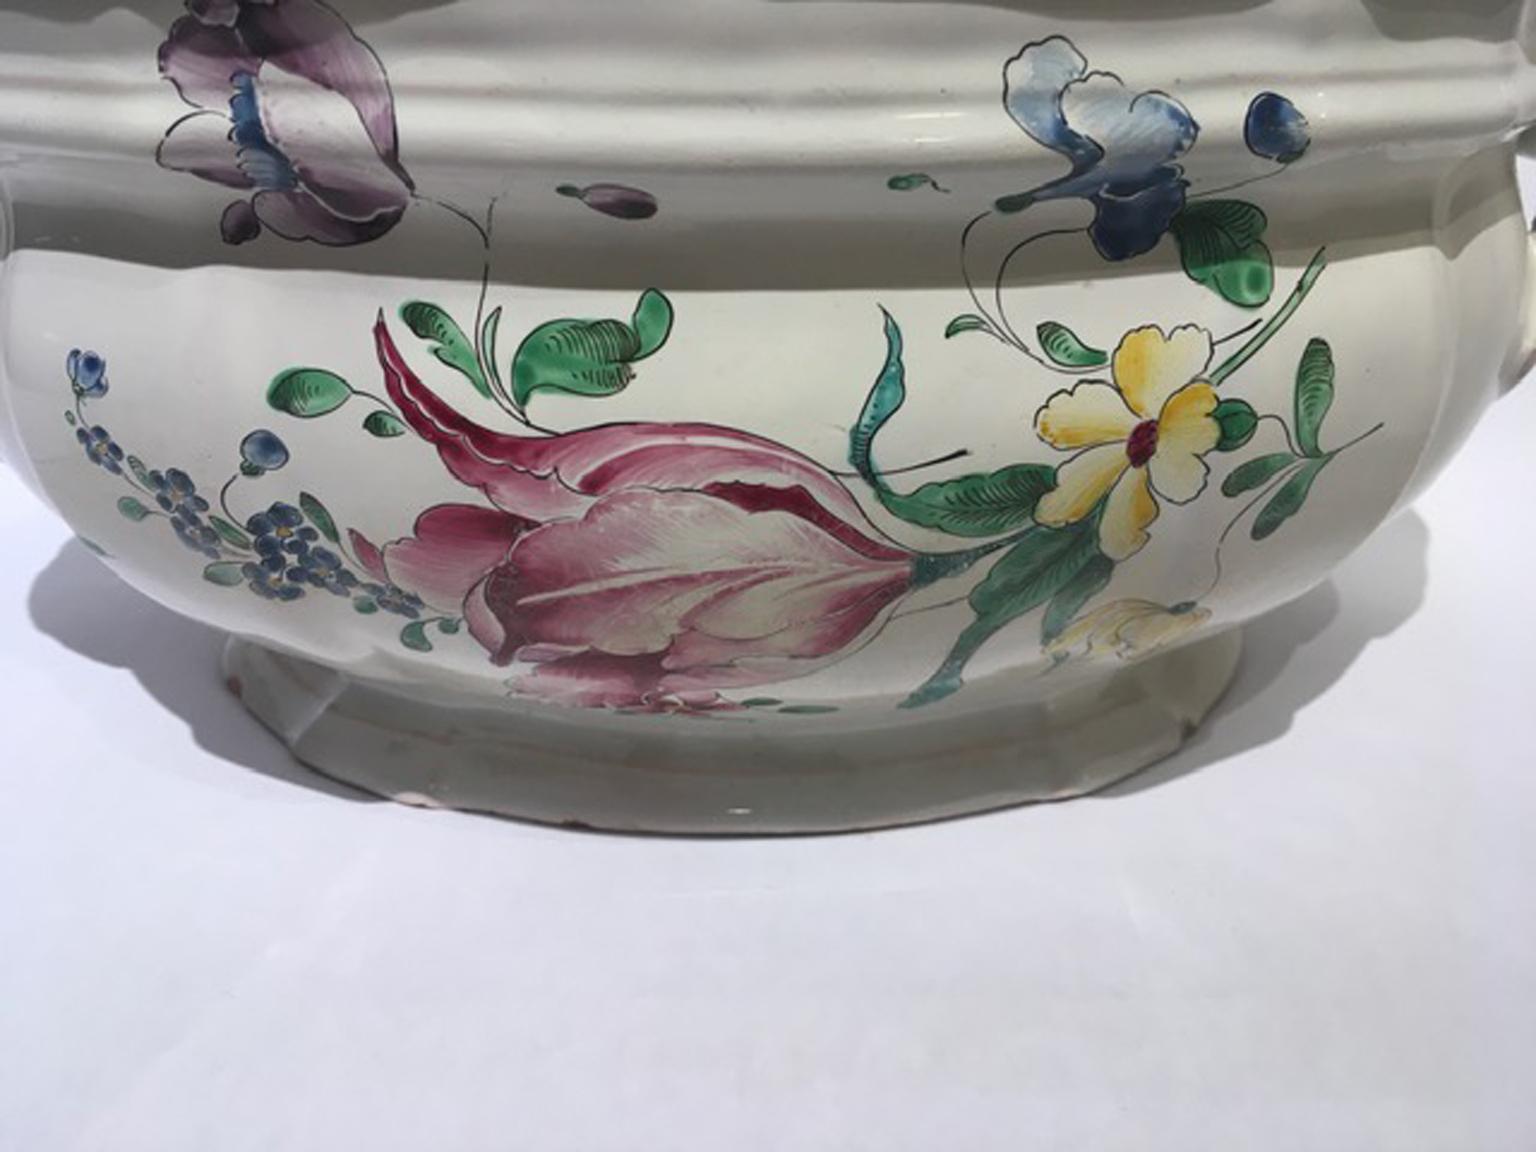 This is an antique porcelain piece made in Strasburgo, France in the mid-18th century.
The beauty of the drawings let understand the high level of the French manufacture.
It was lost an edge piece of the lid, but the beauty it wasn't